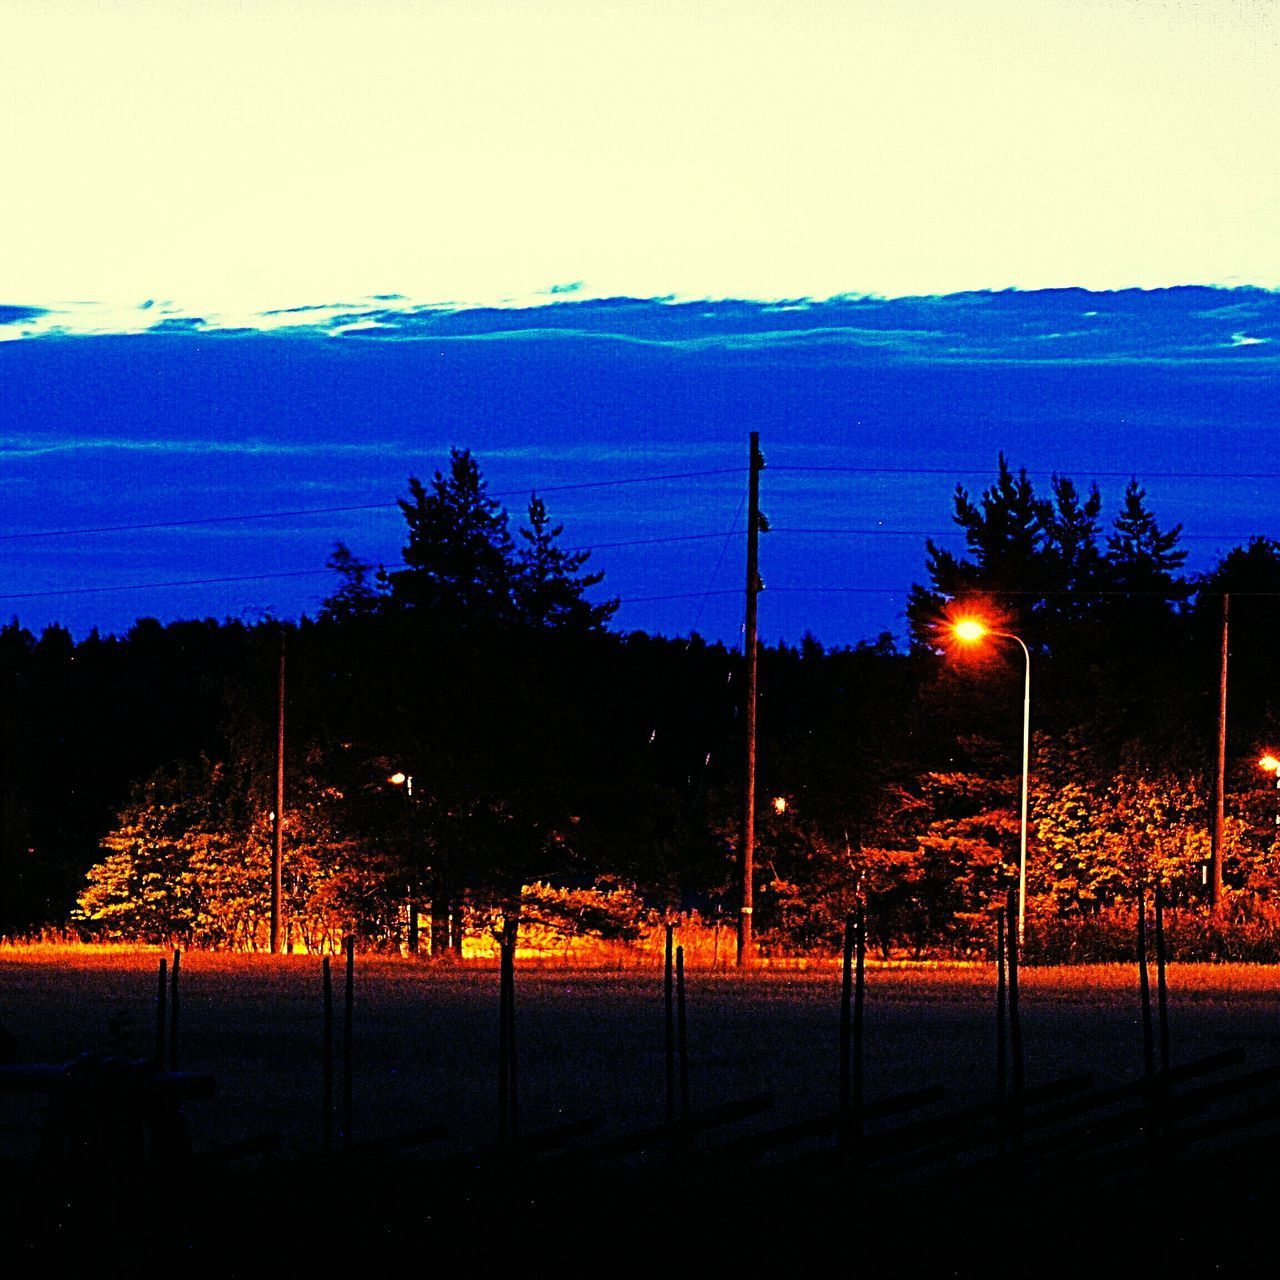 SILHOUETTE TREES ON FIELD AT NIGHT